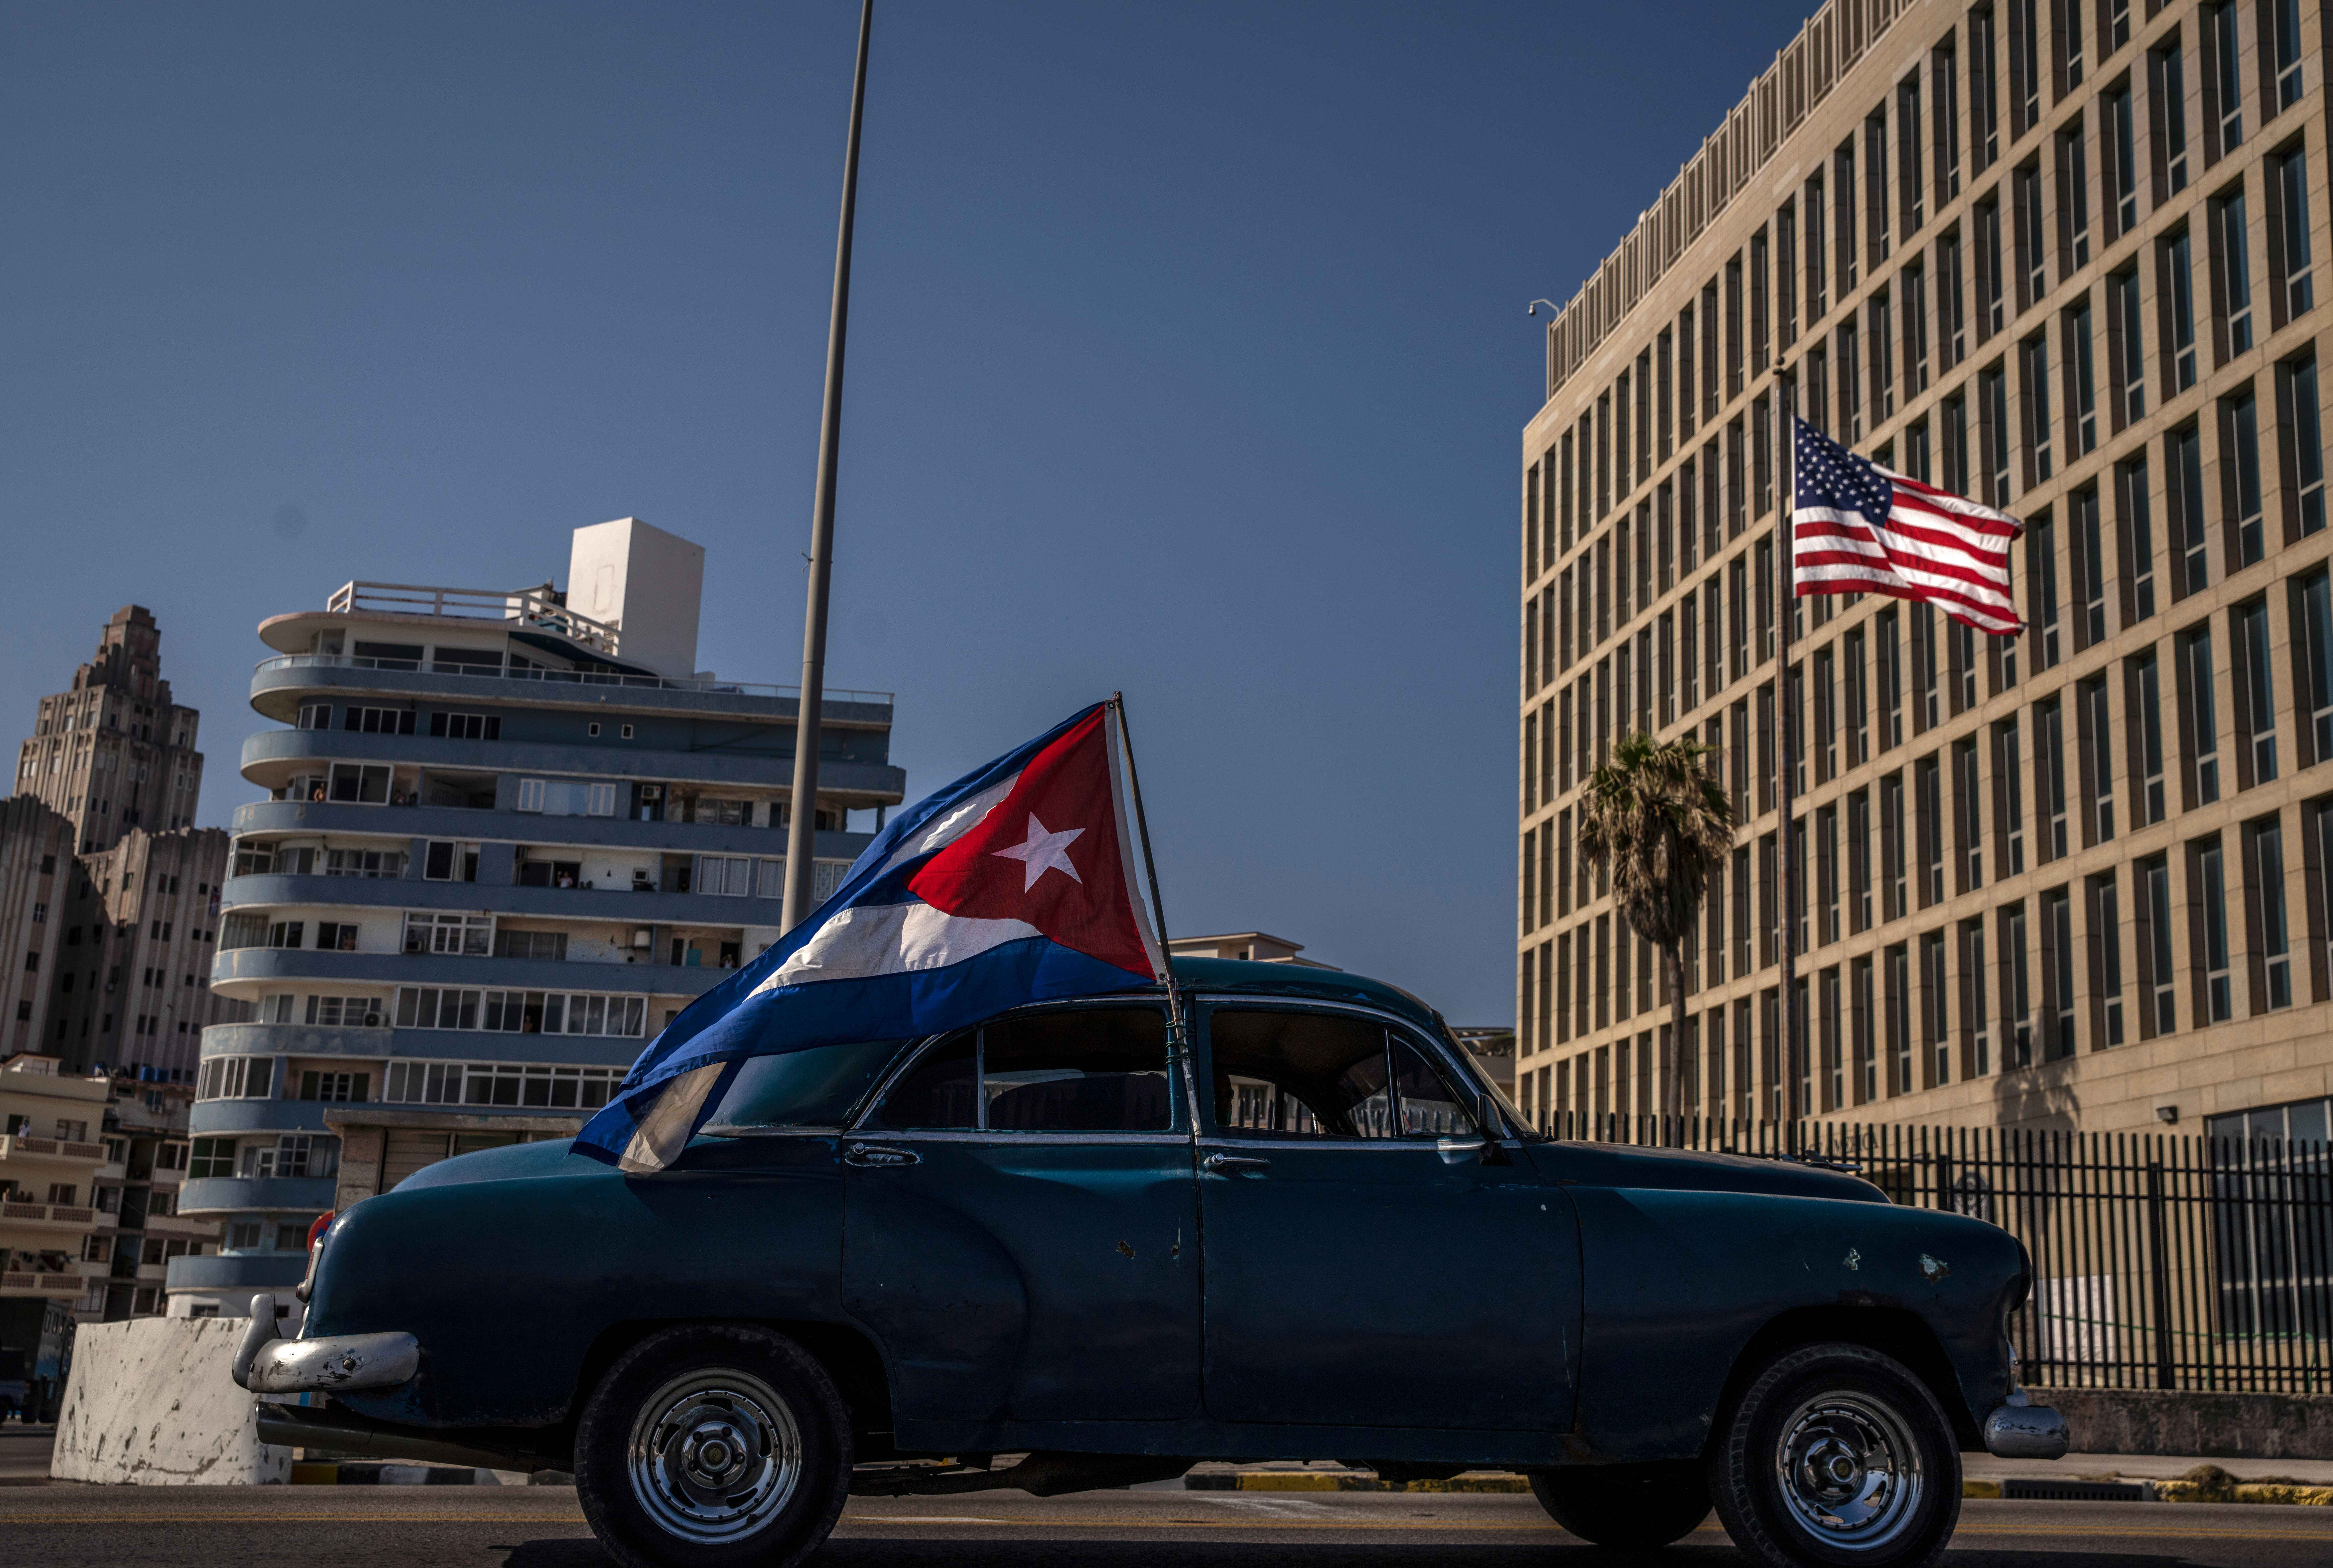 Manuel Rocha, a retired American diplomat, was accused by US authorities on Monday of having worked as a secret agent for the Cuban government for decades.